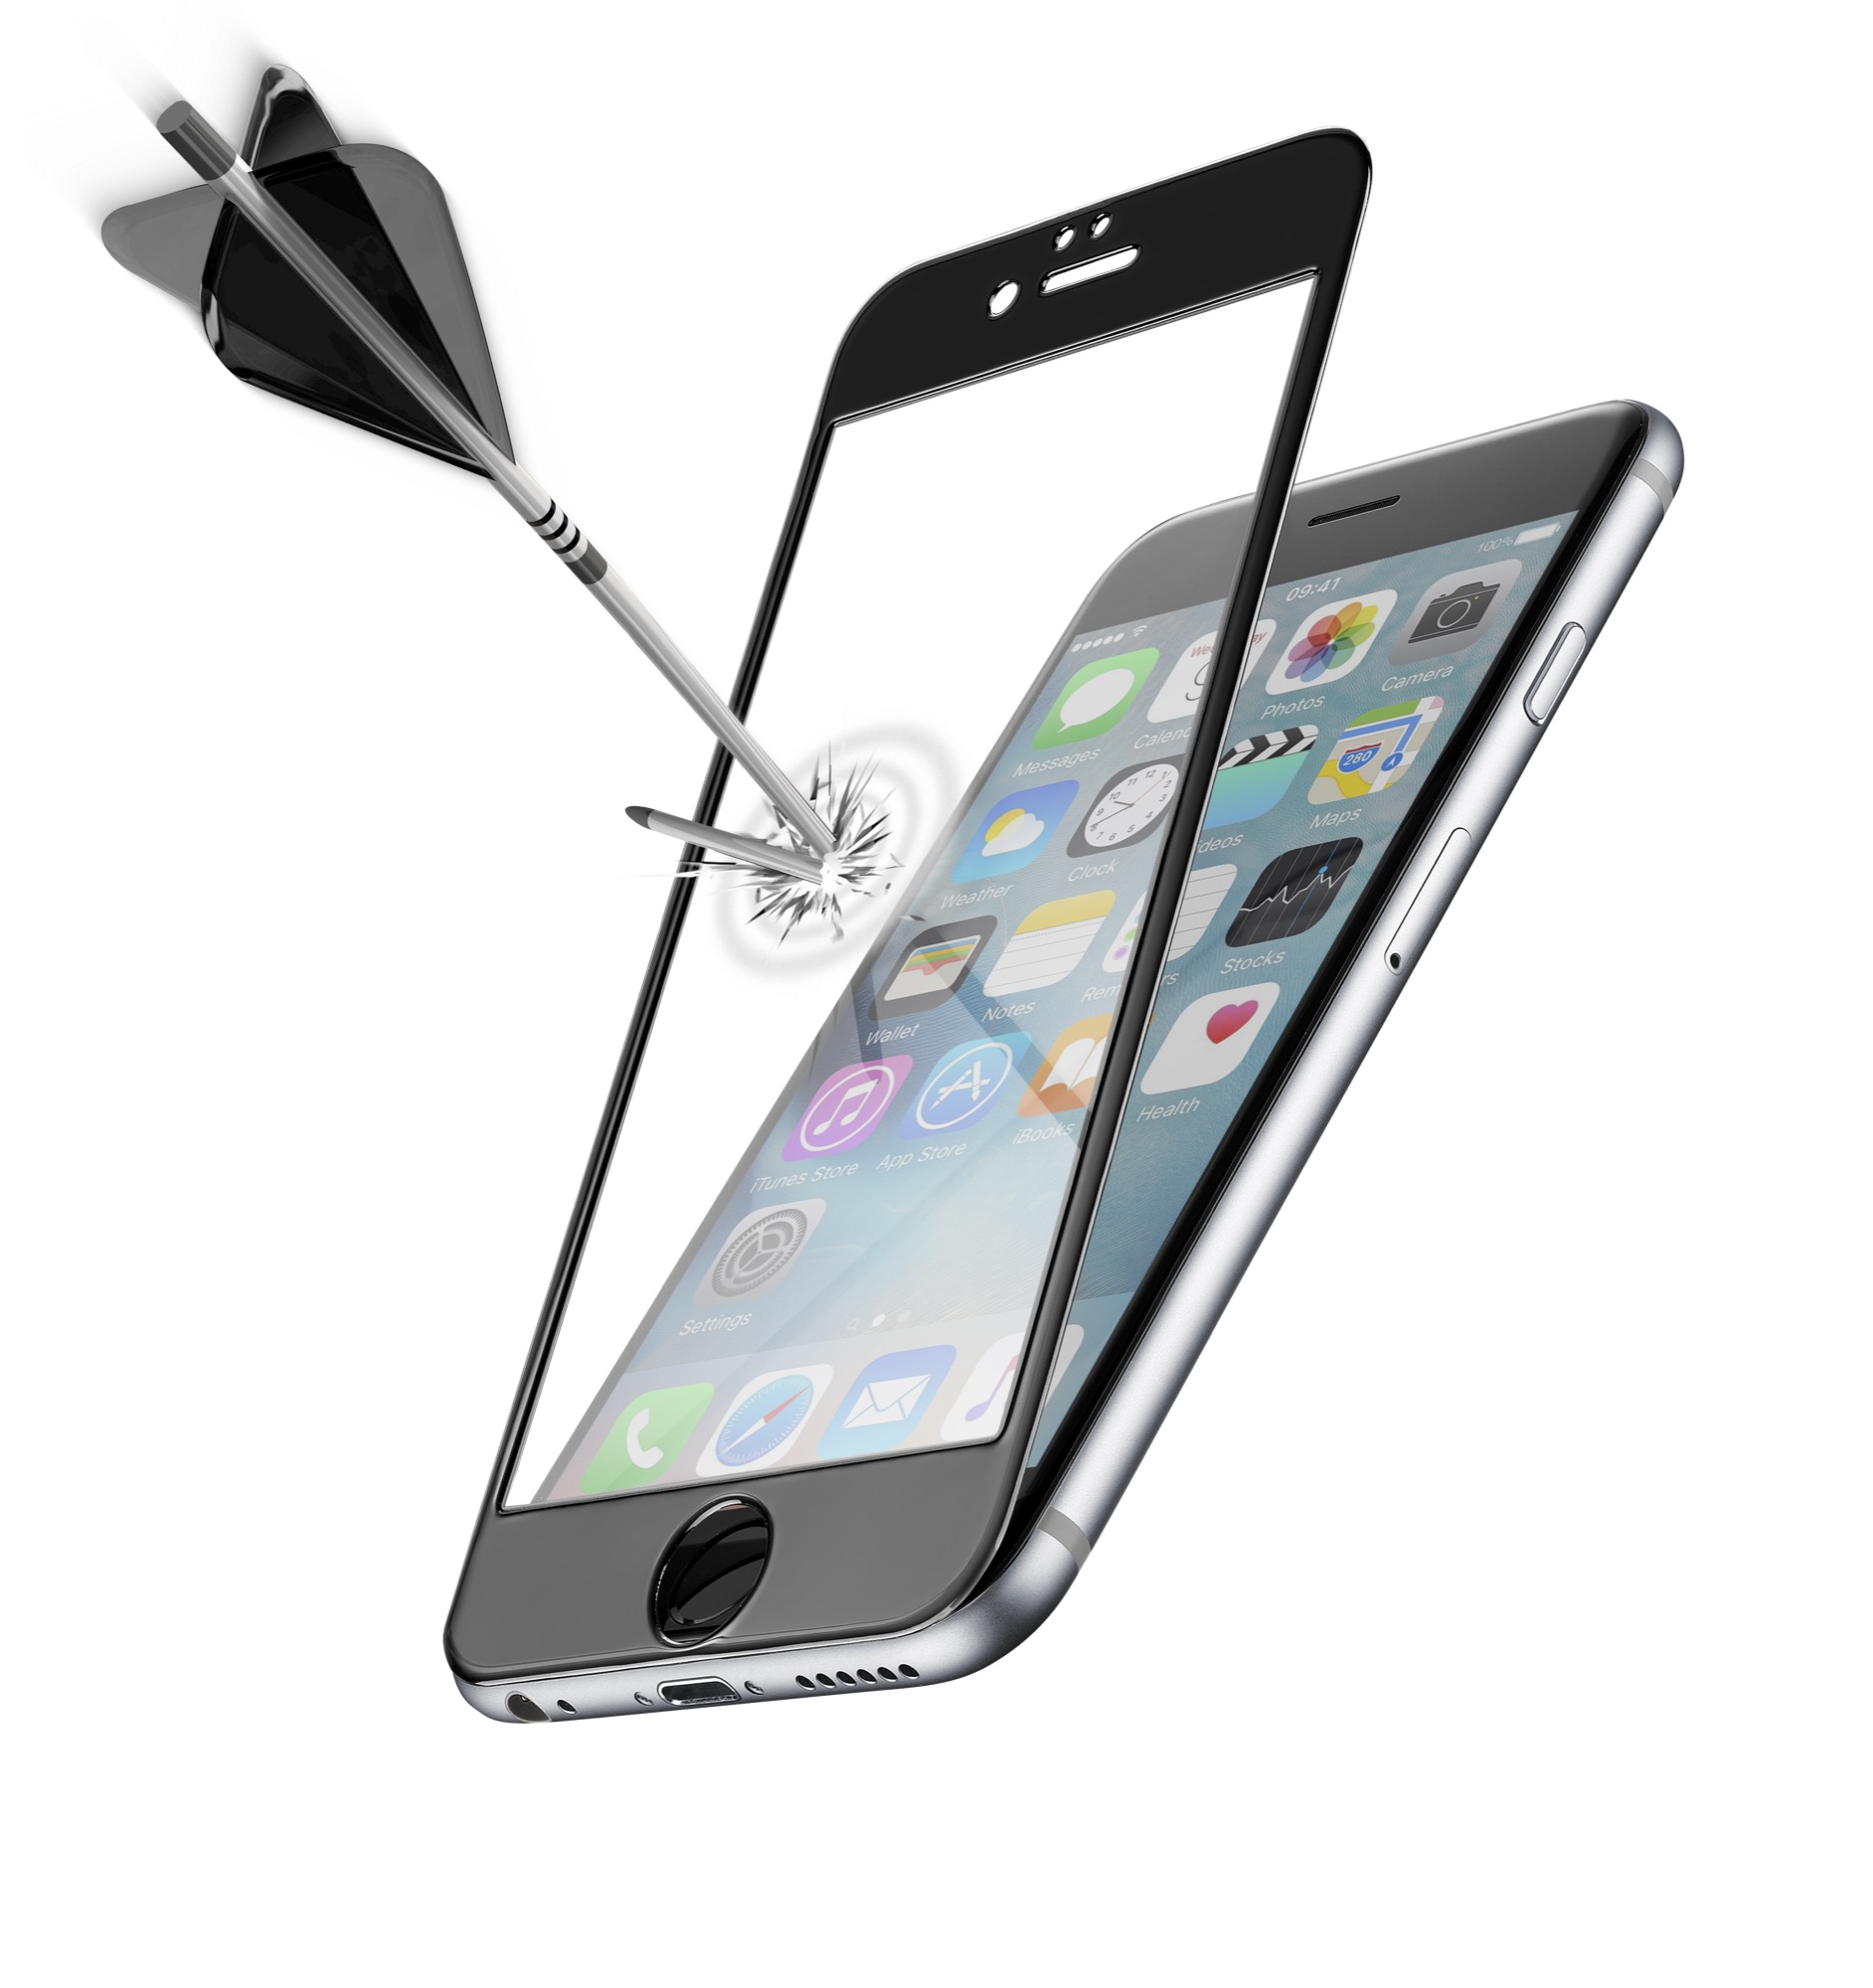 Iphone 6s, screen protector, tempered glass, capsule, black